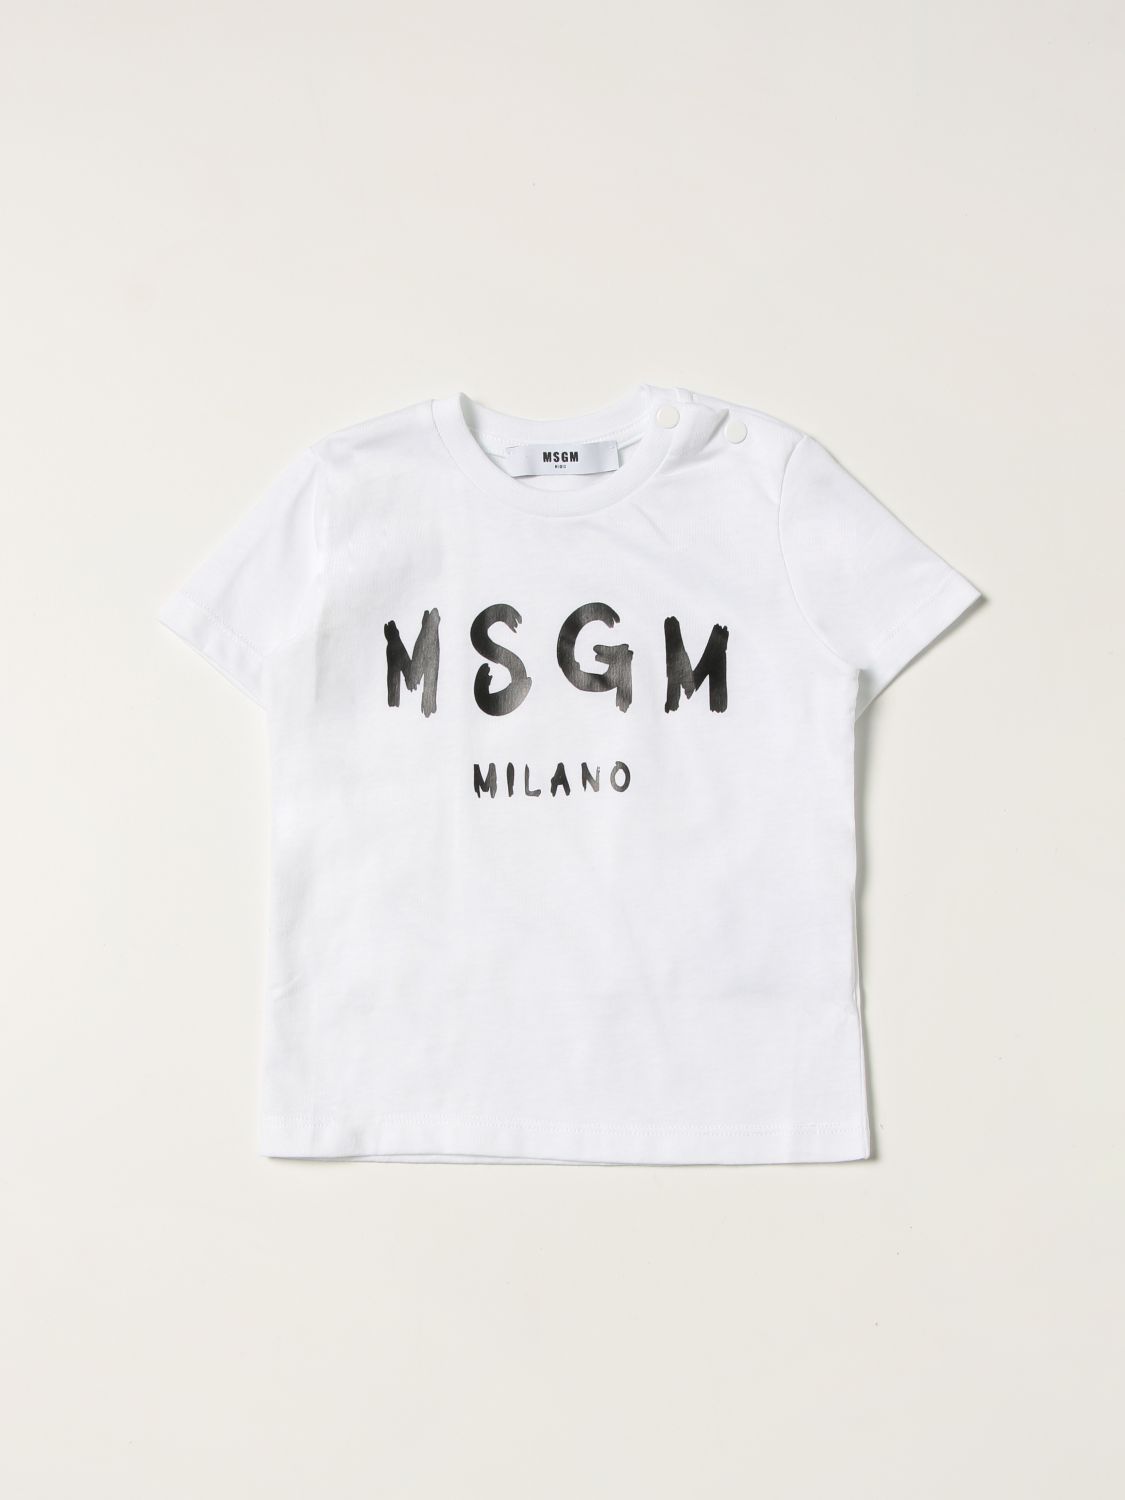 Msgm Kids Spring Summer 2022 new collection 2022 online on 